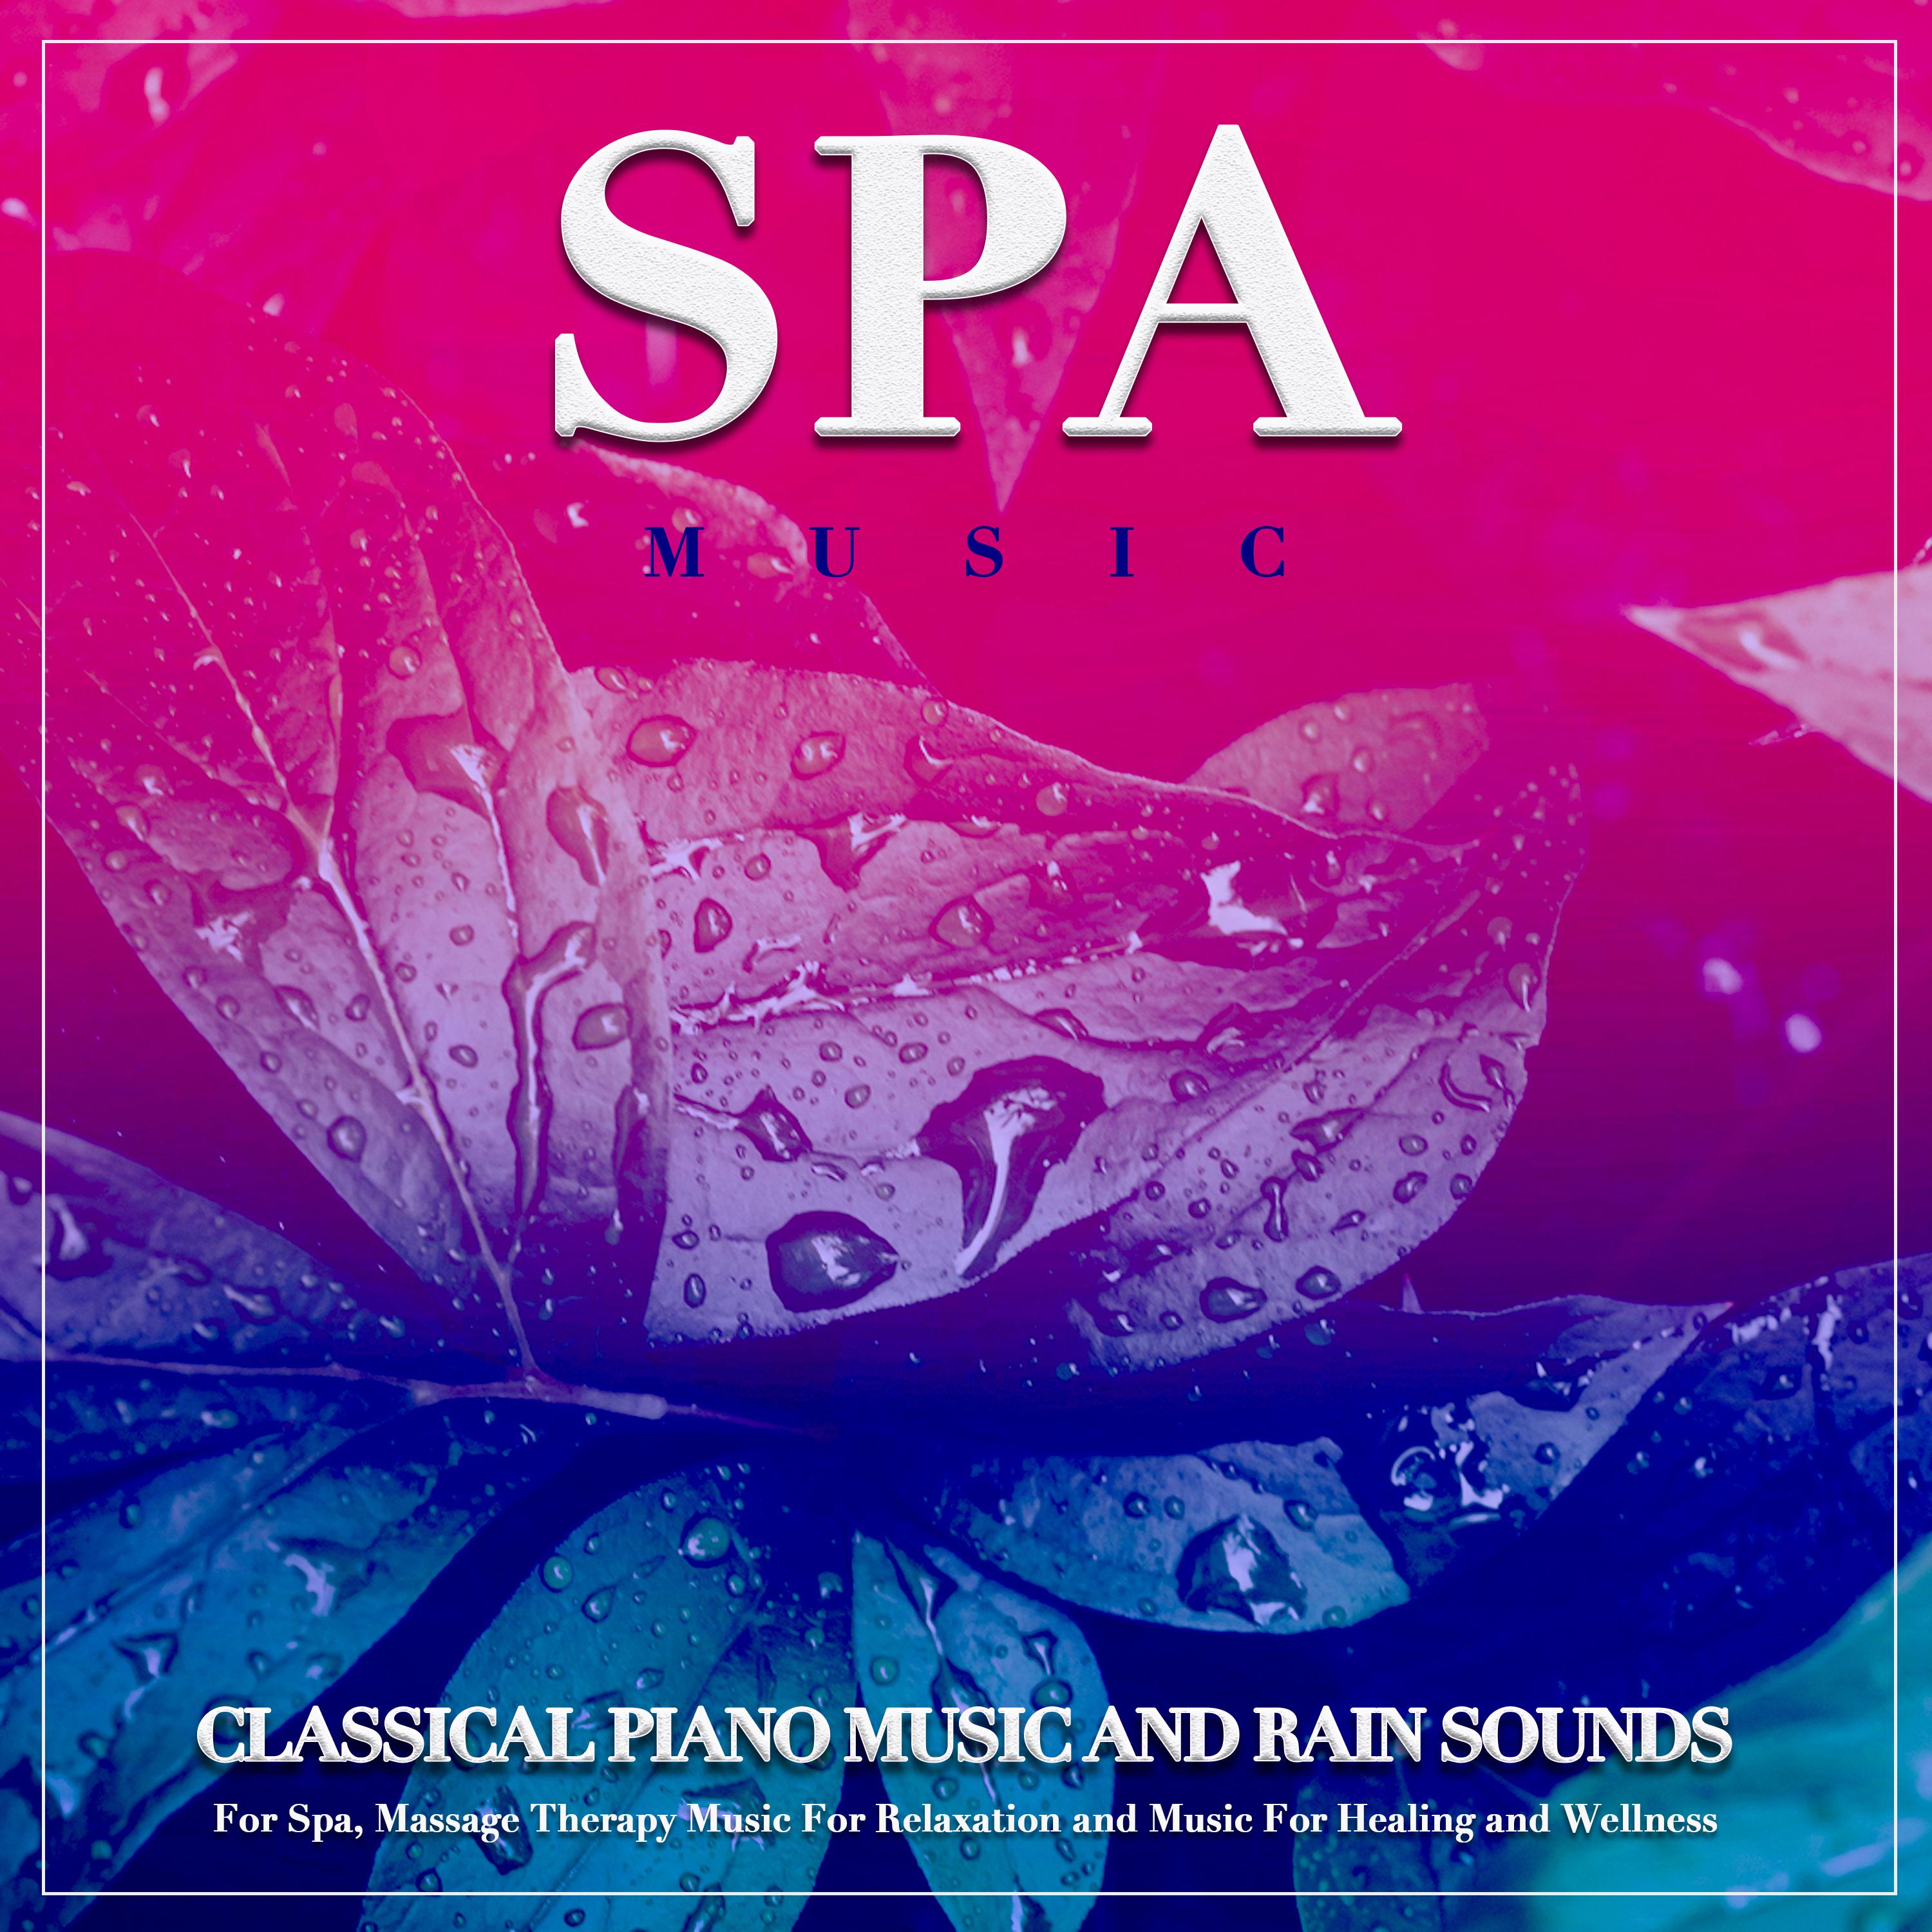 Tale Of Distant Lands - Schumann - Classical Piano and Rain Sounds - Spa Music